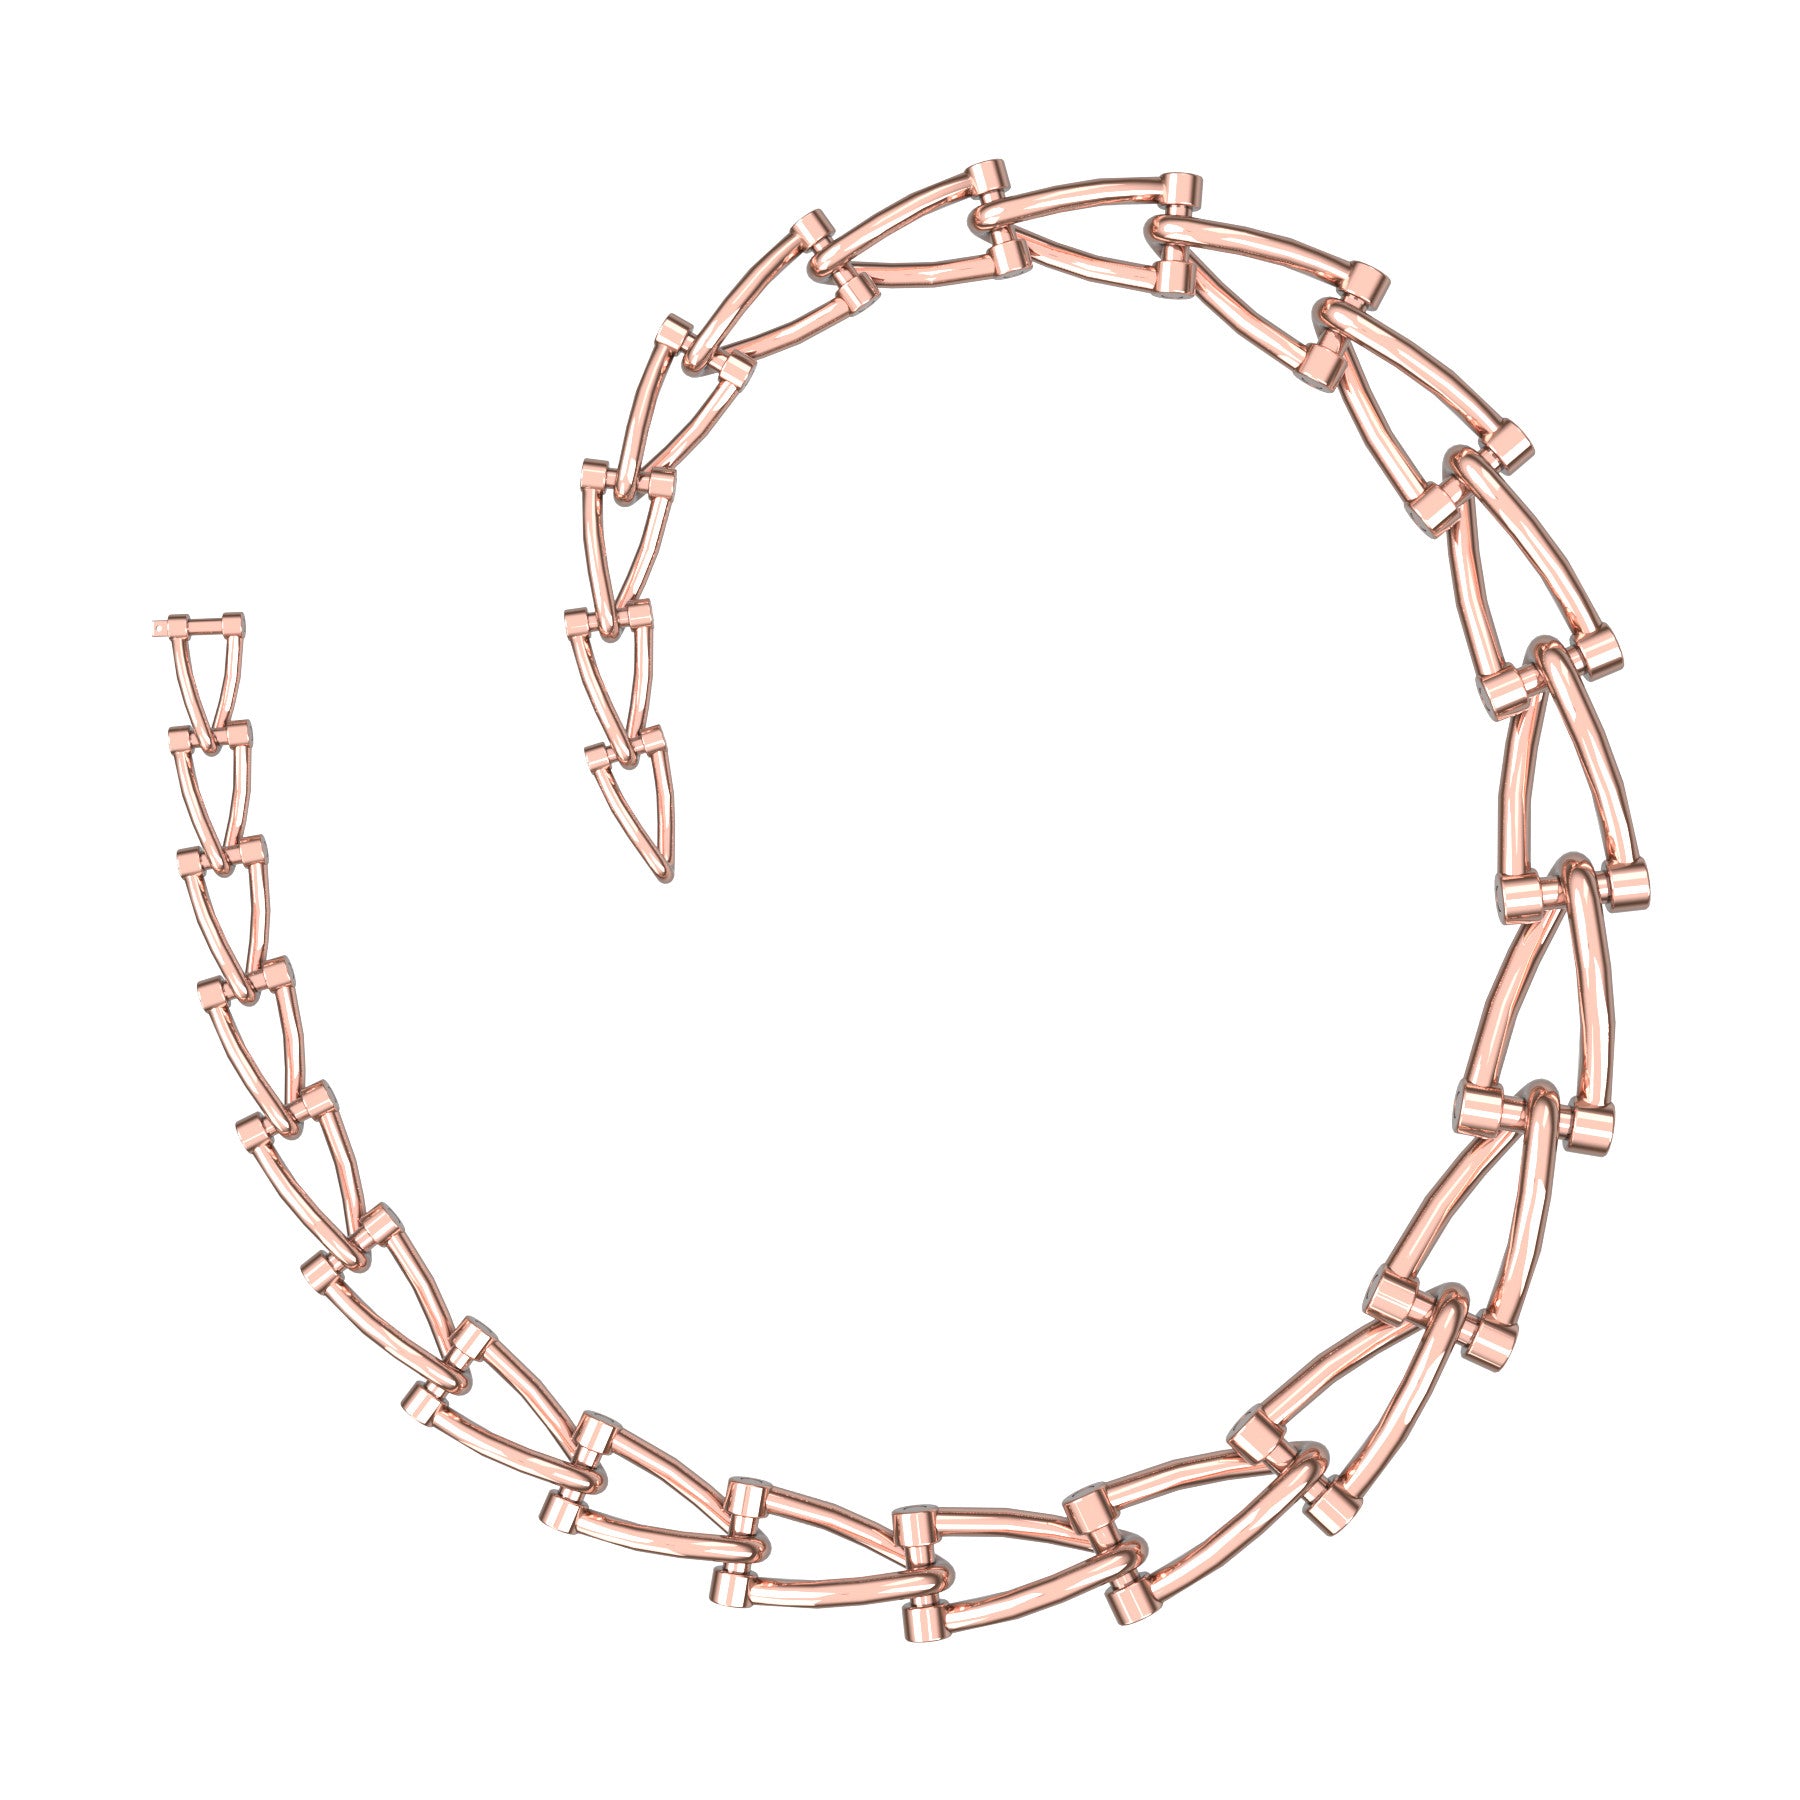 marine links necklace, 18 K pink gold, weight about 135 to 162 g (4.76 to 5.71 oz), width 7,8 to 15,7 mm max